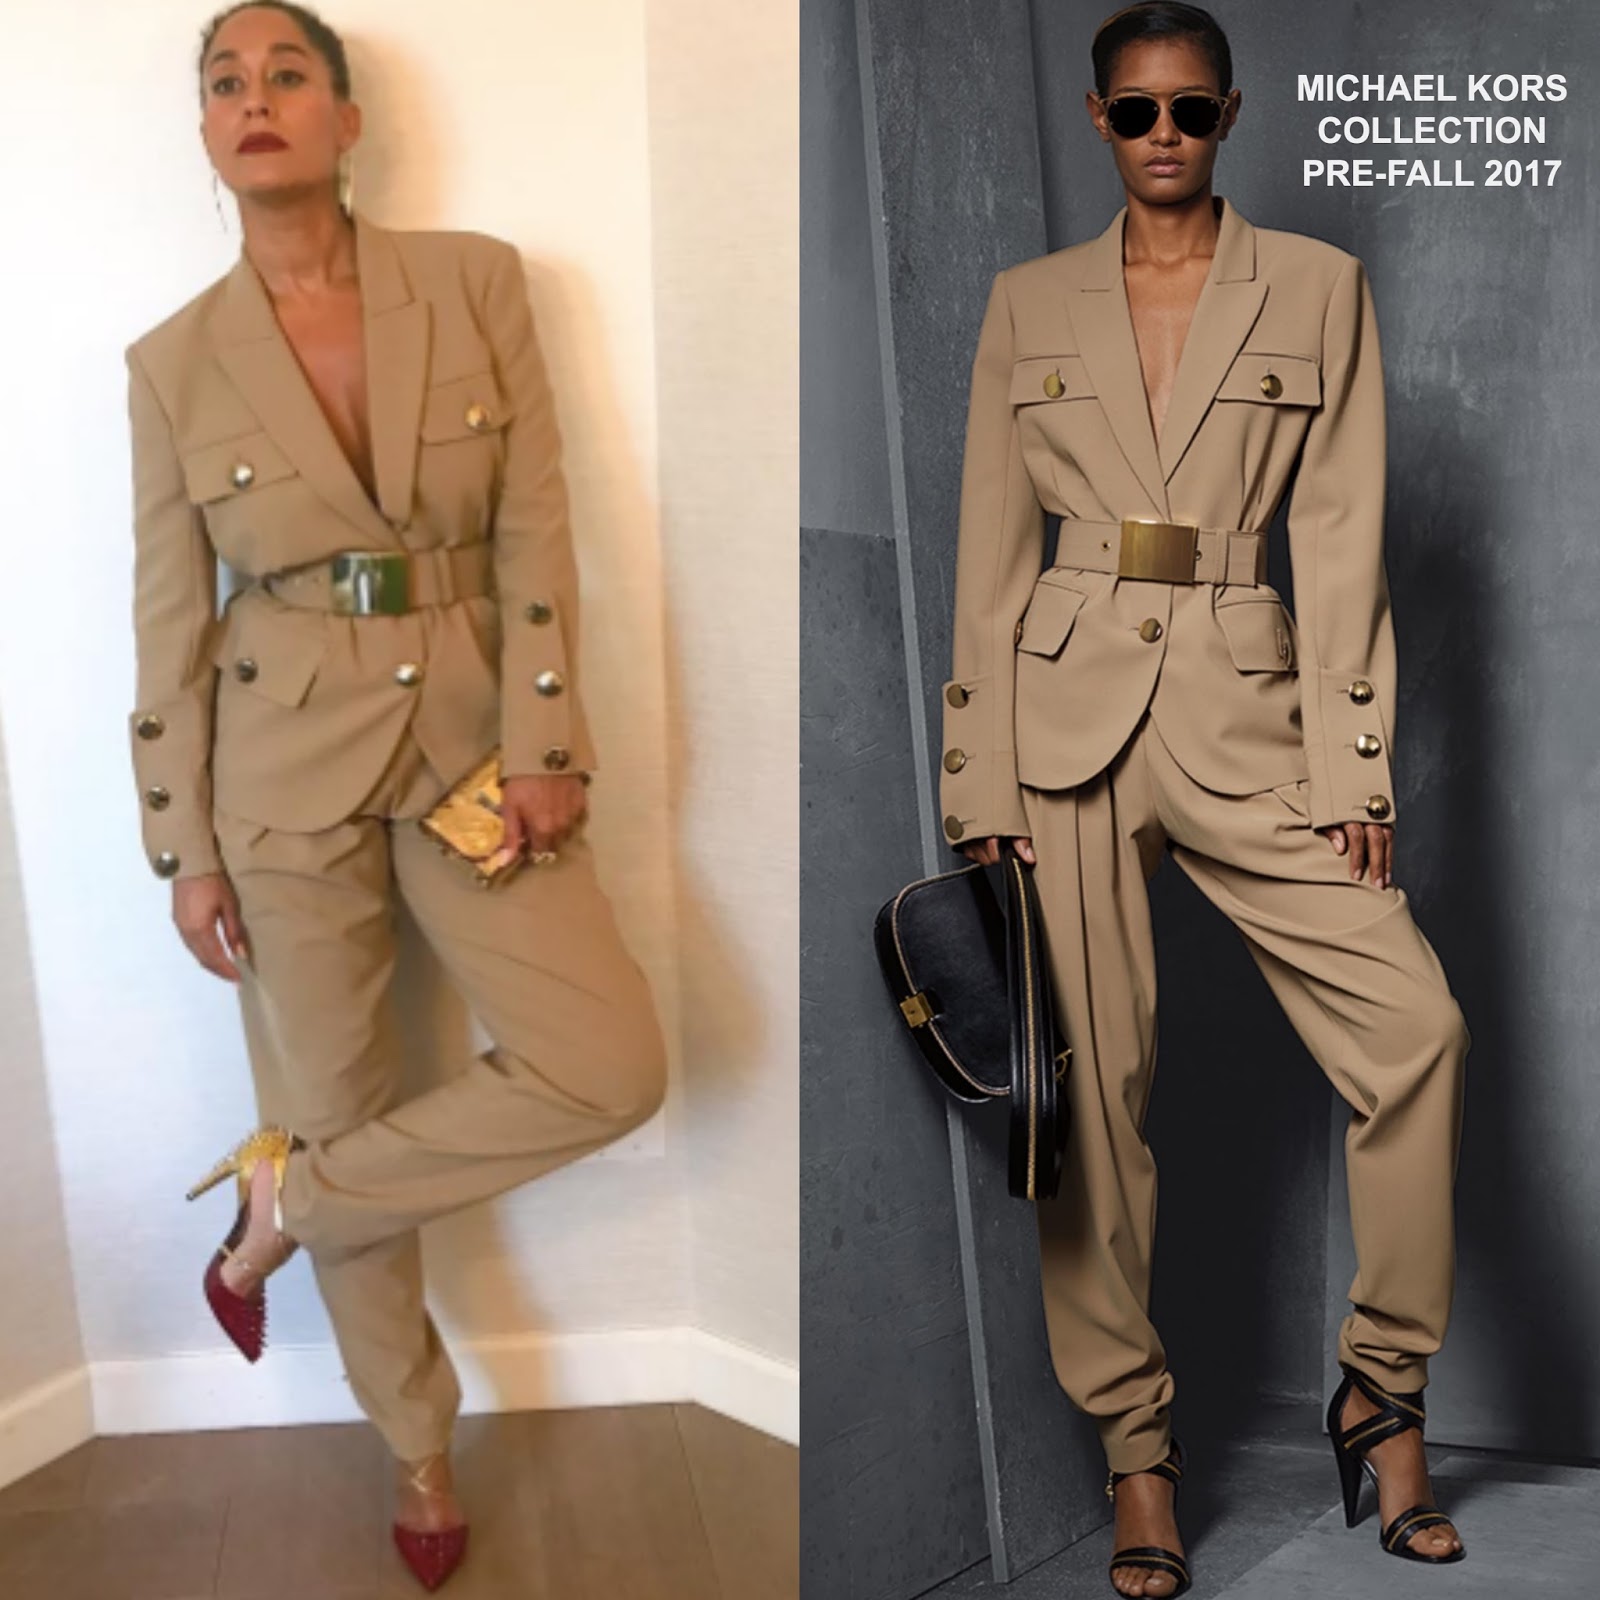 Instagram Style: Tracee Ellis Ross in Michael Kors Collection